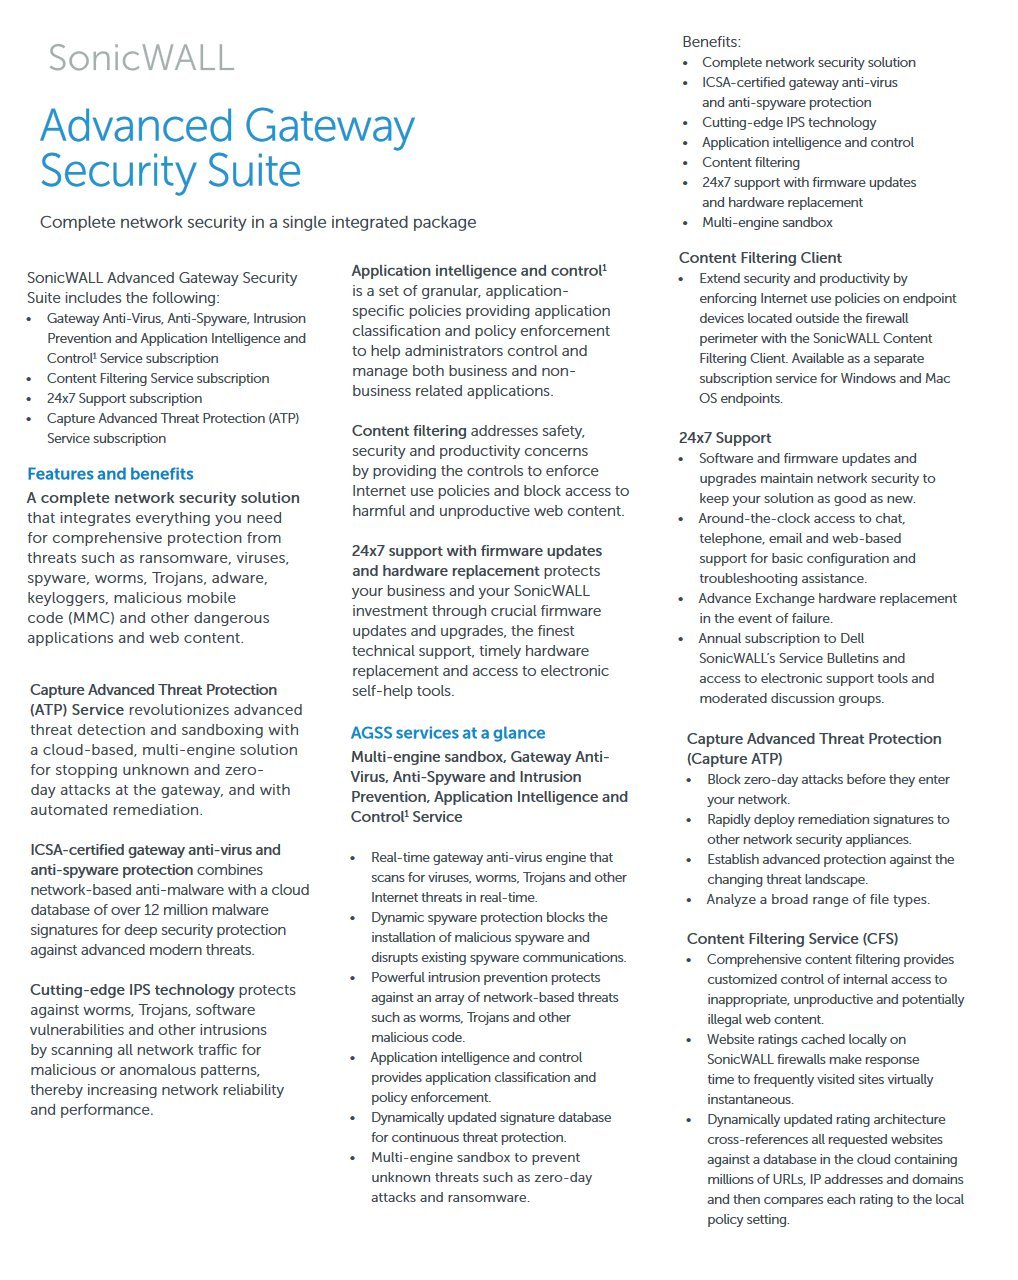 SonicWALL Comprehensive Gateway Security Suite Bundle for SONICWALL SOHO Series